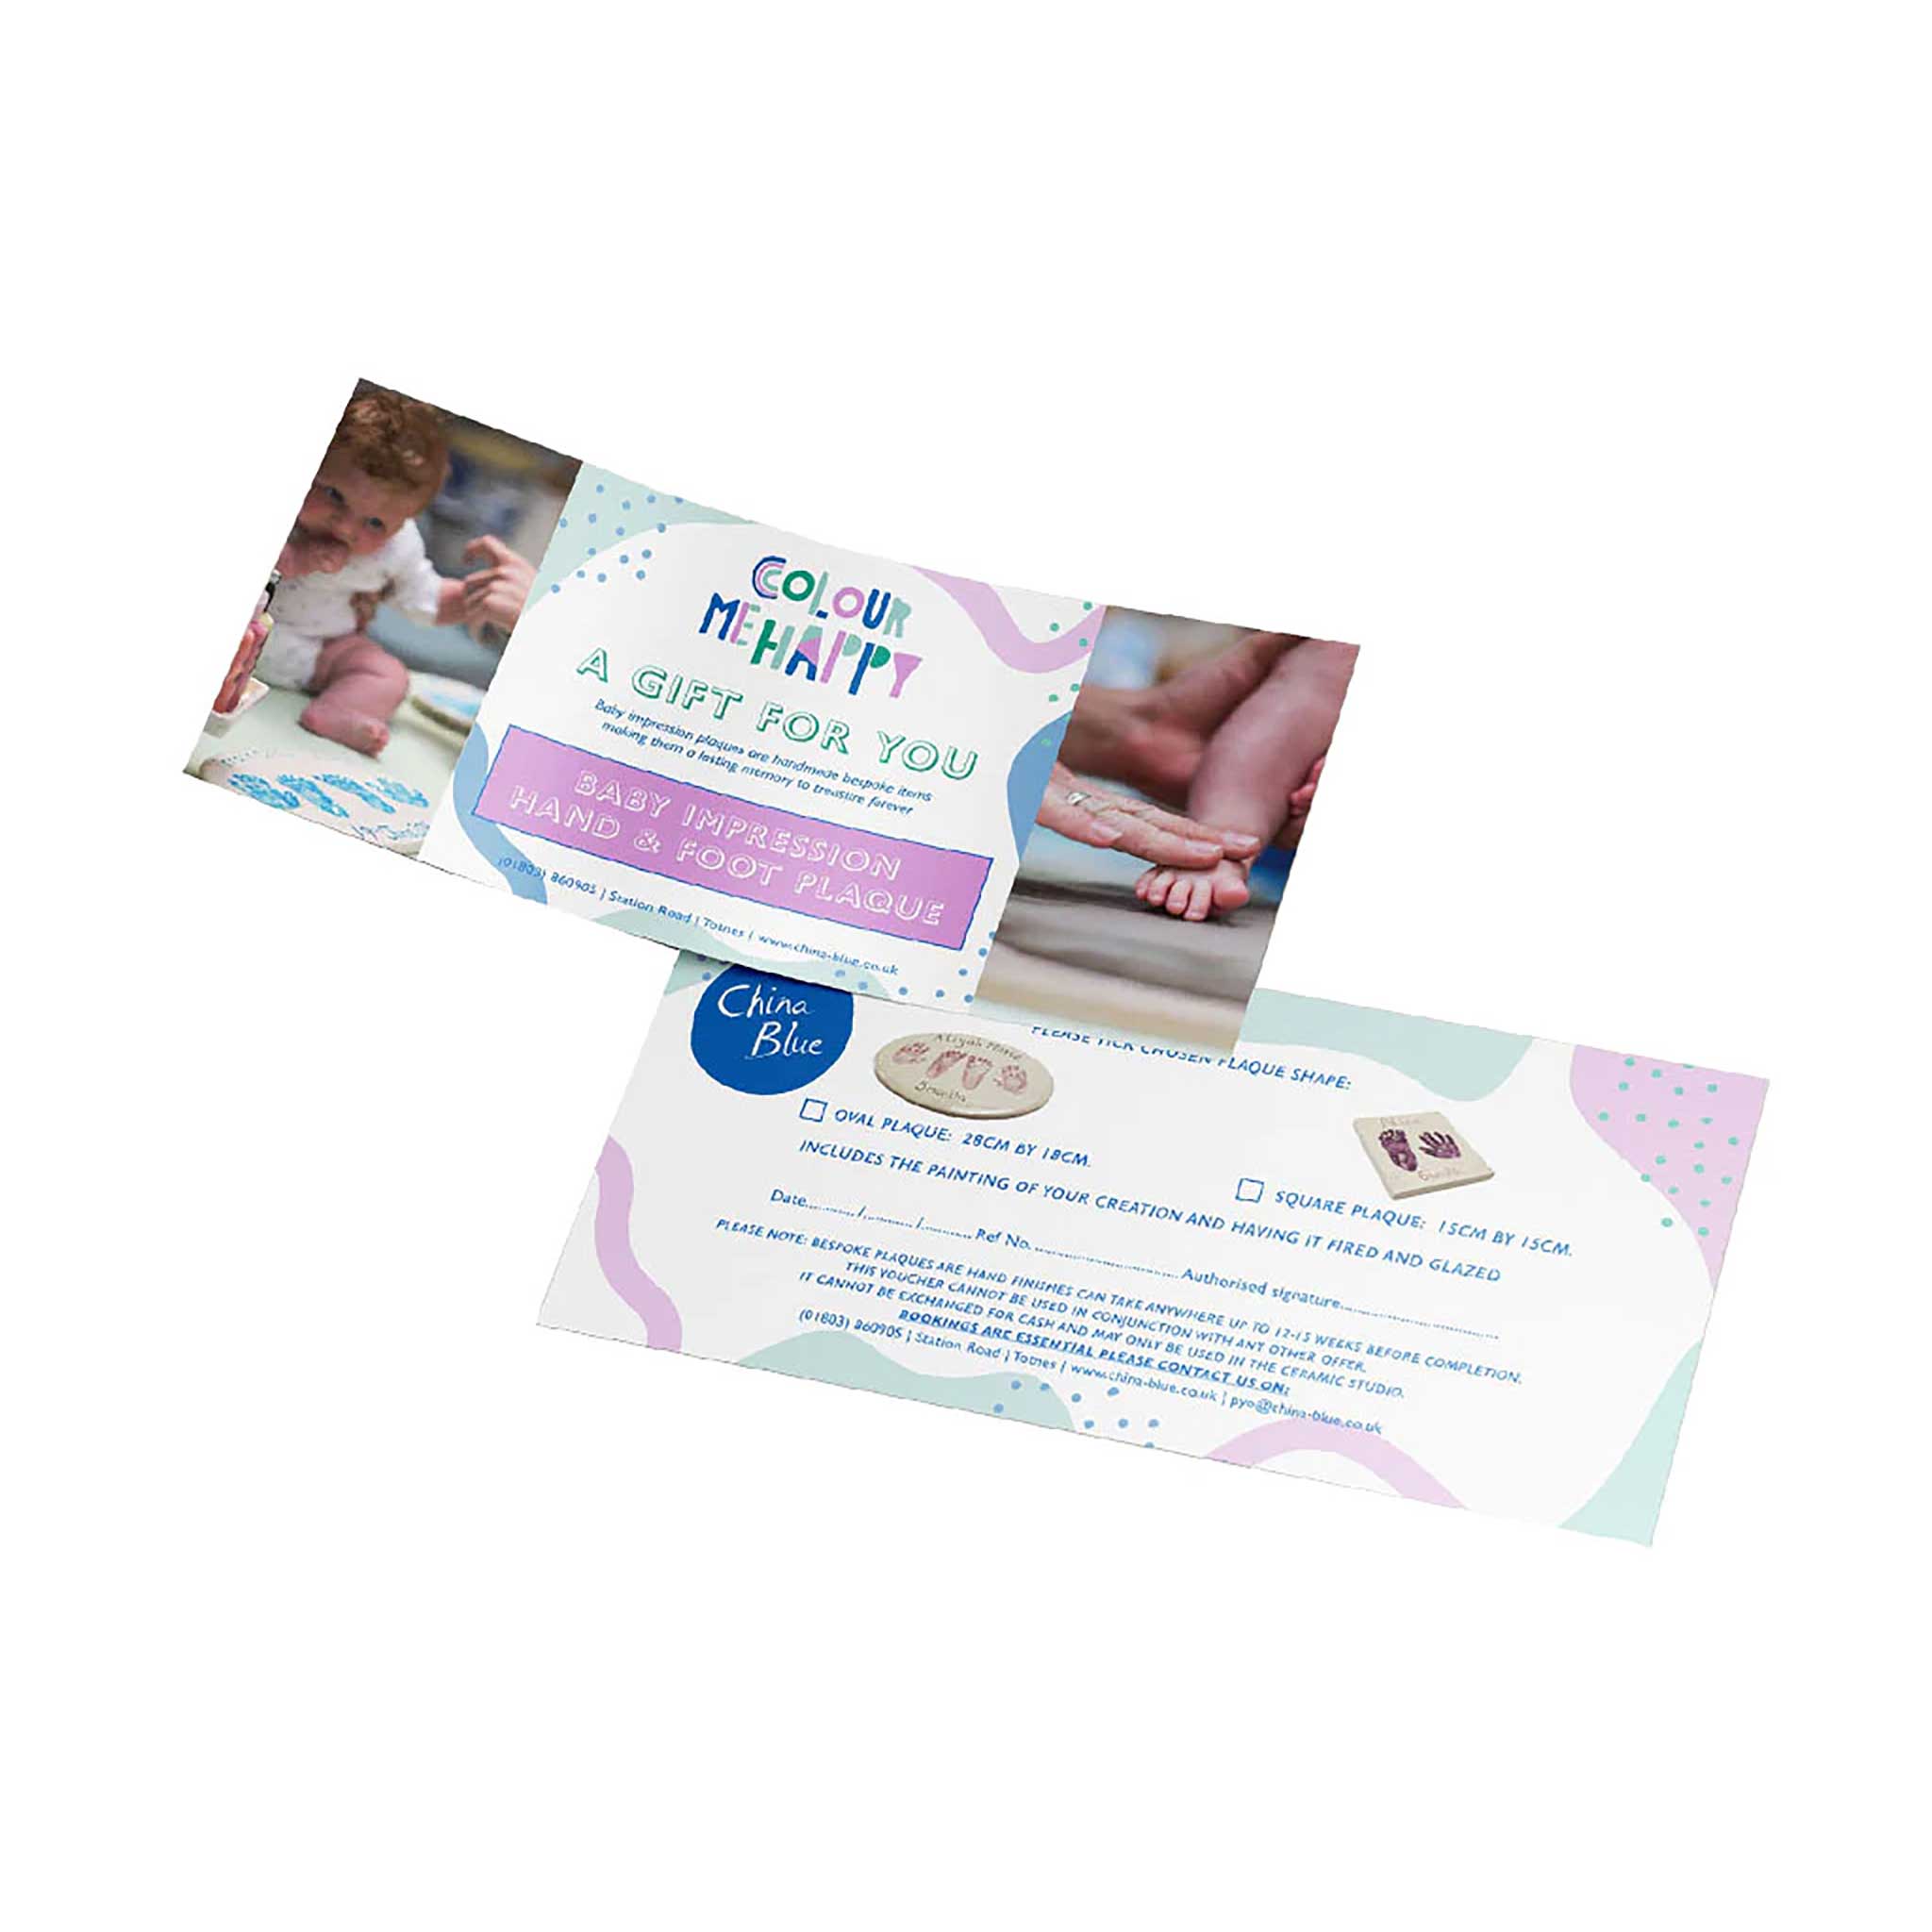 Oval Hand & Foot Plaque Voucher from China Blue